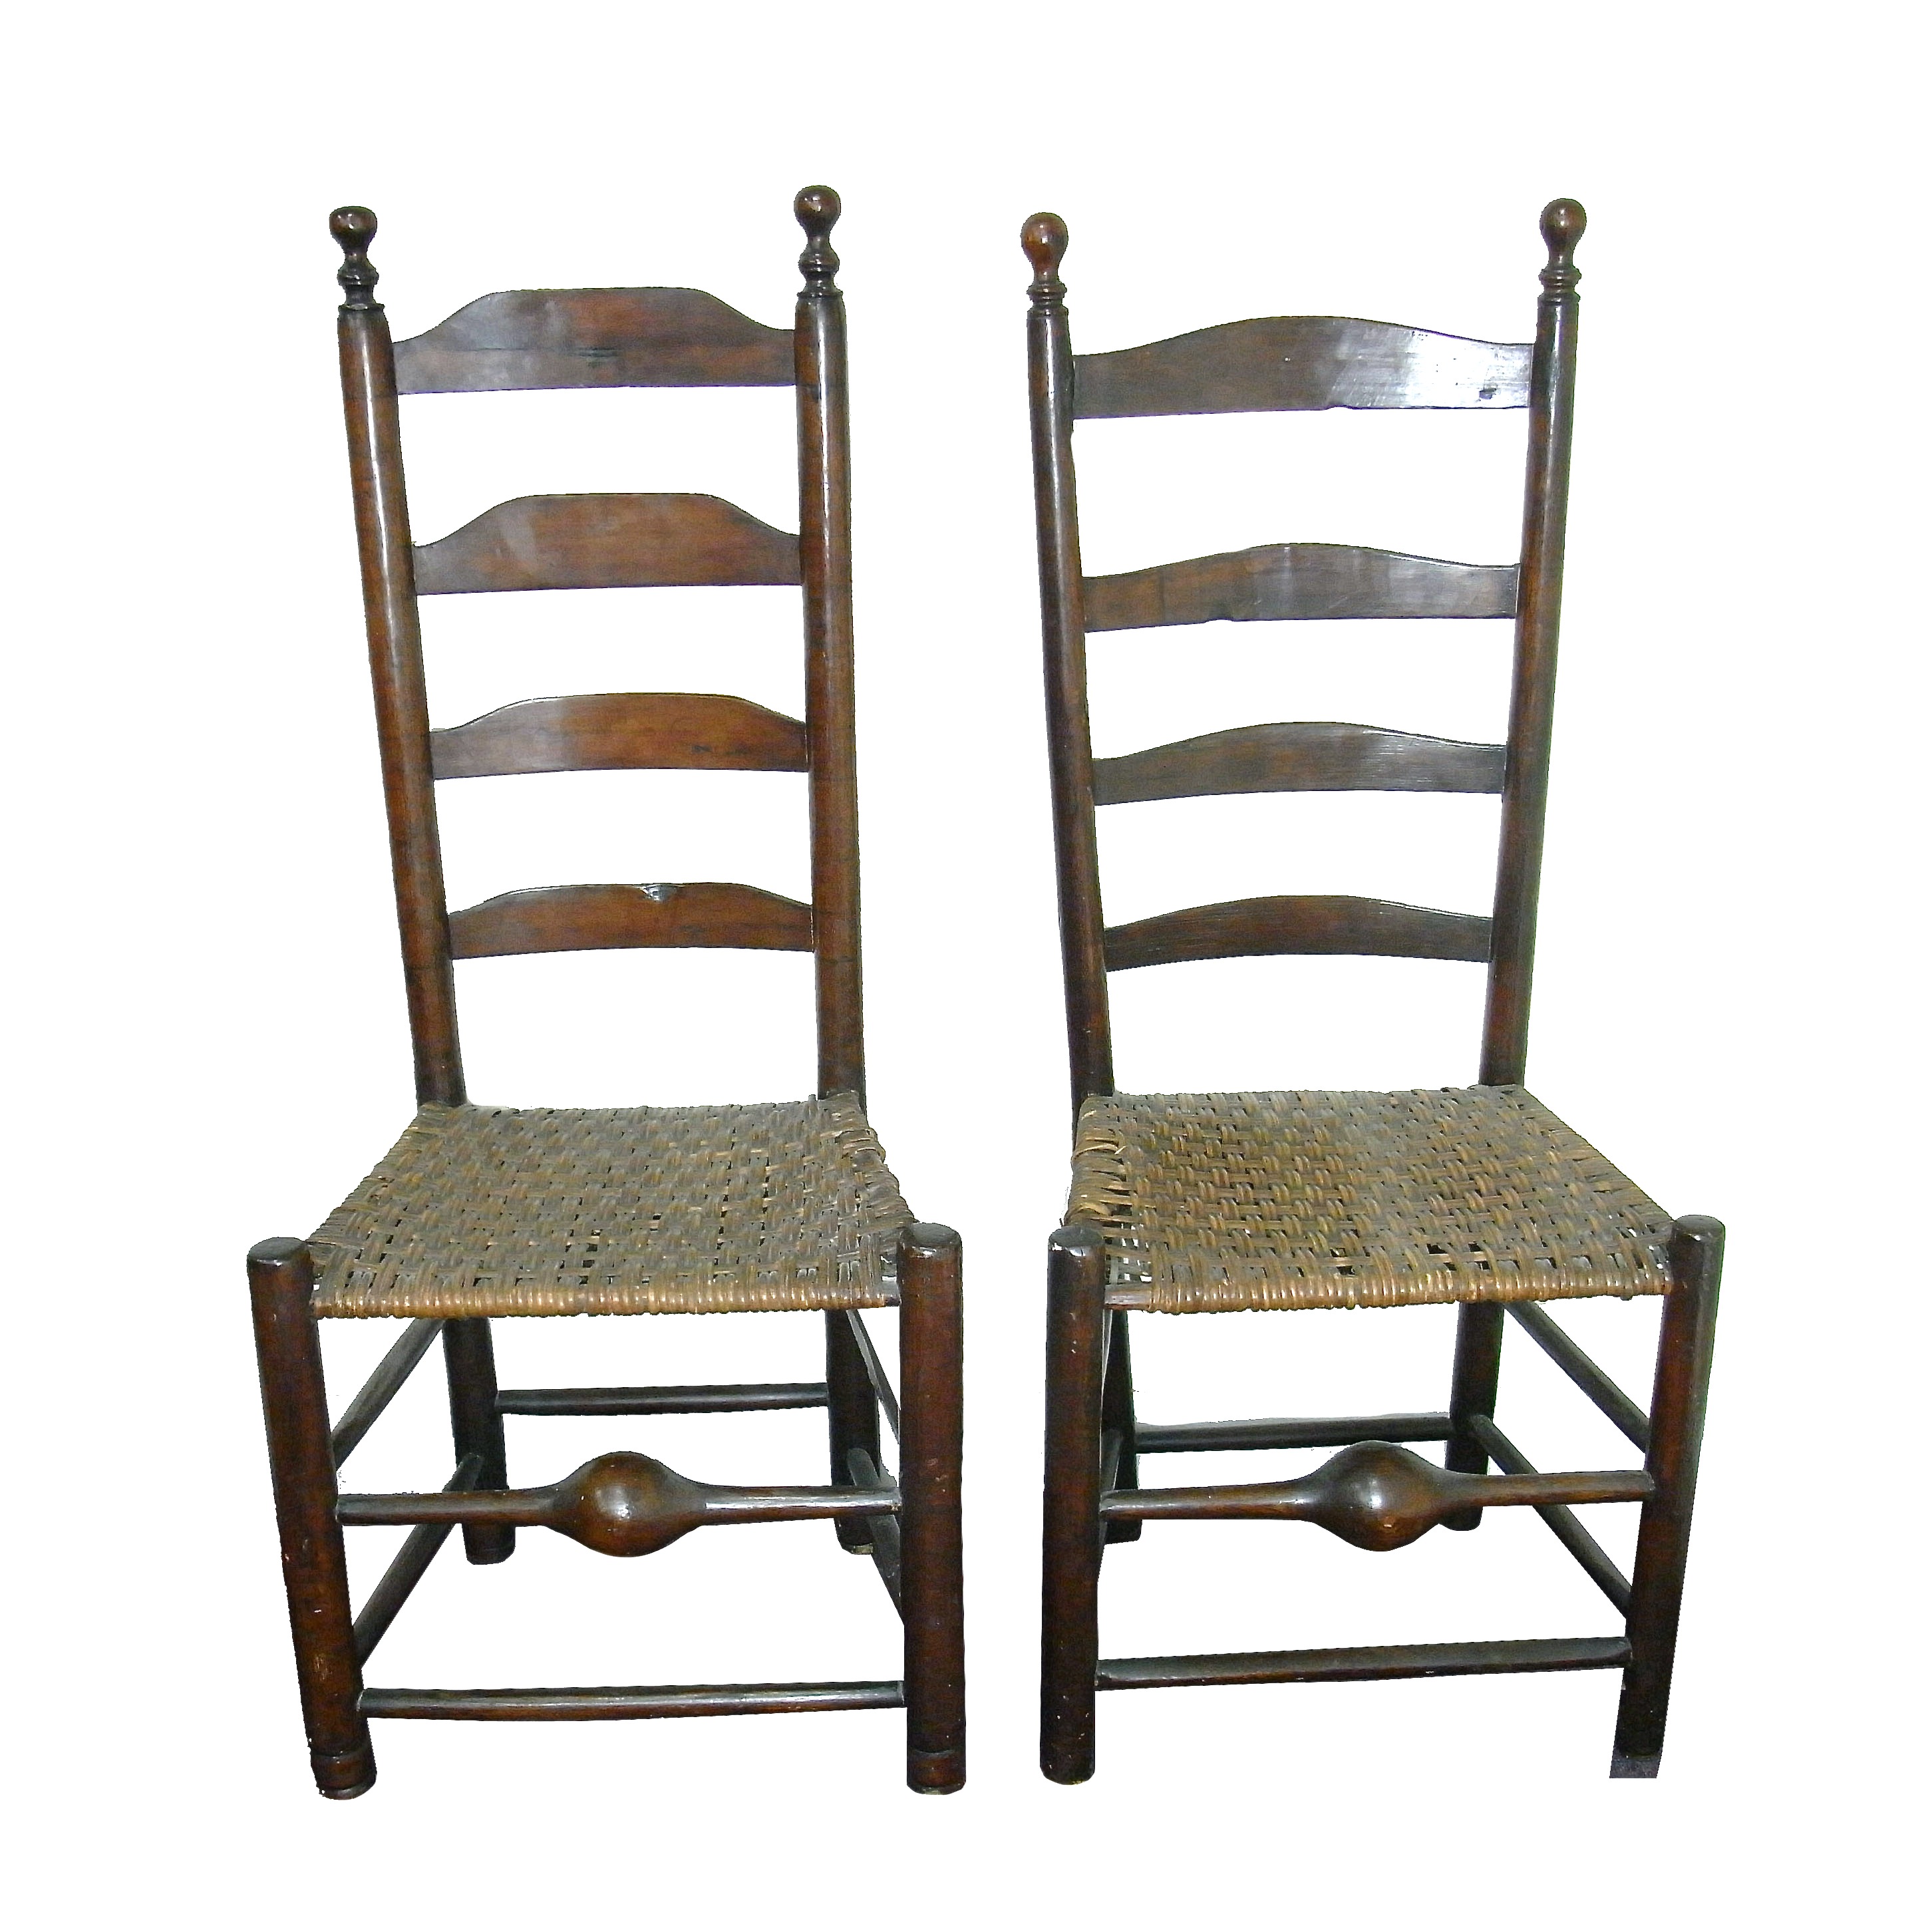 Two Victorian ladder back chairs.